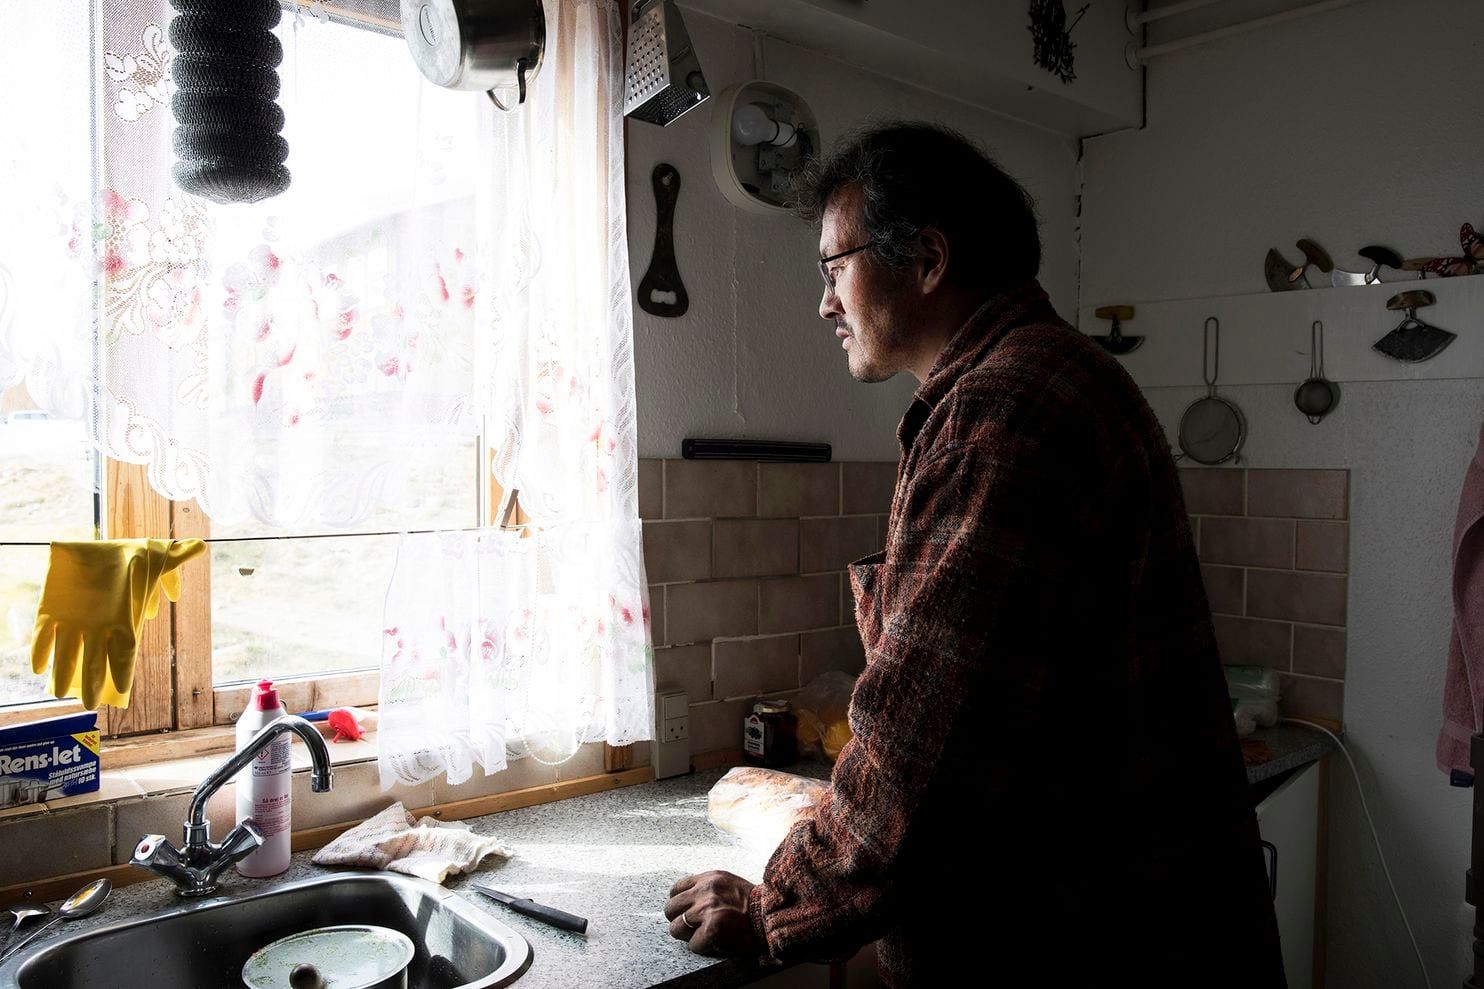 Orla Kleist, who lives in Qaanaaq, says his house has been damaged repeatedly over the years by changes in the permafrost. Image by Anna Filipova. Greenland, 2019.